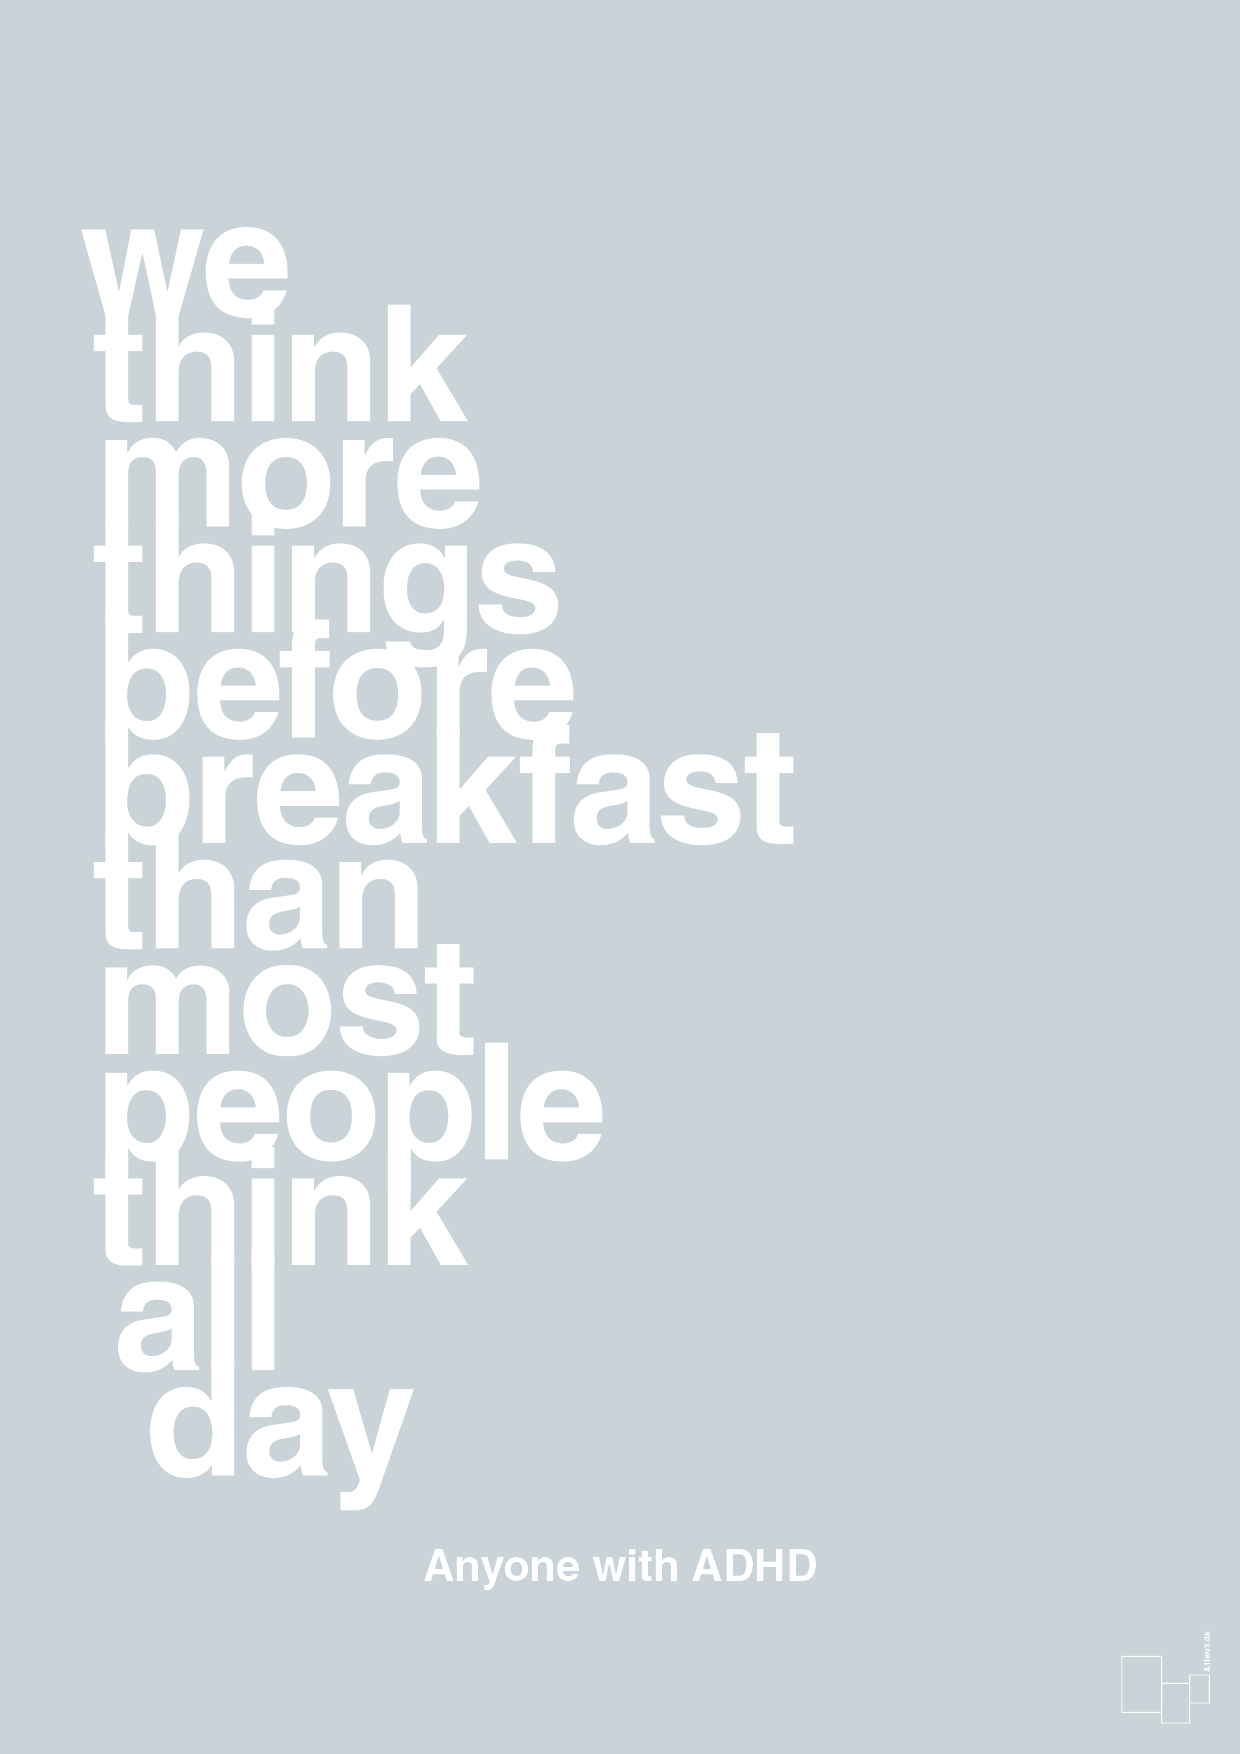 we think more things before breakfast than most people think all day - Plakat med Samfund i Light Drizzle